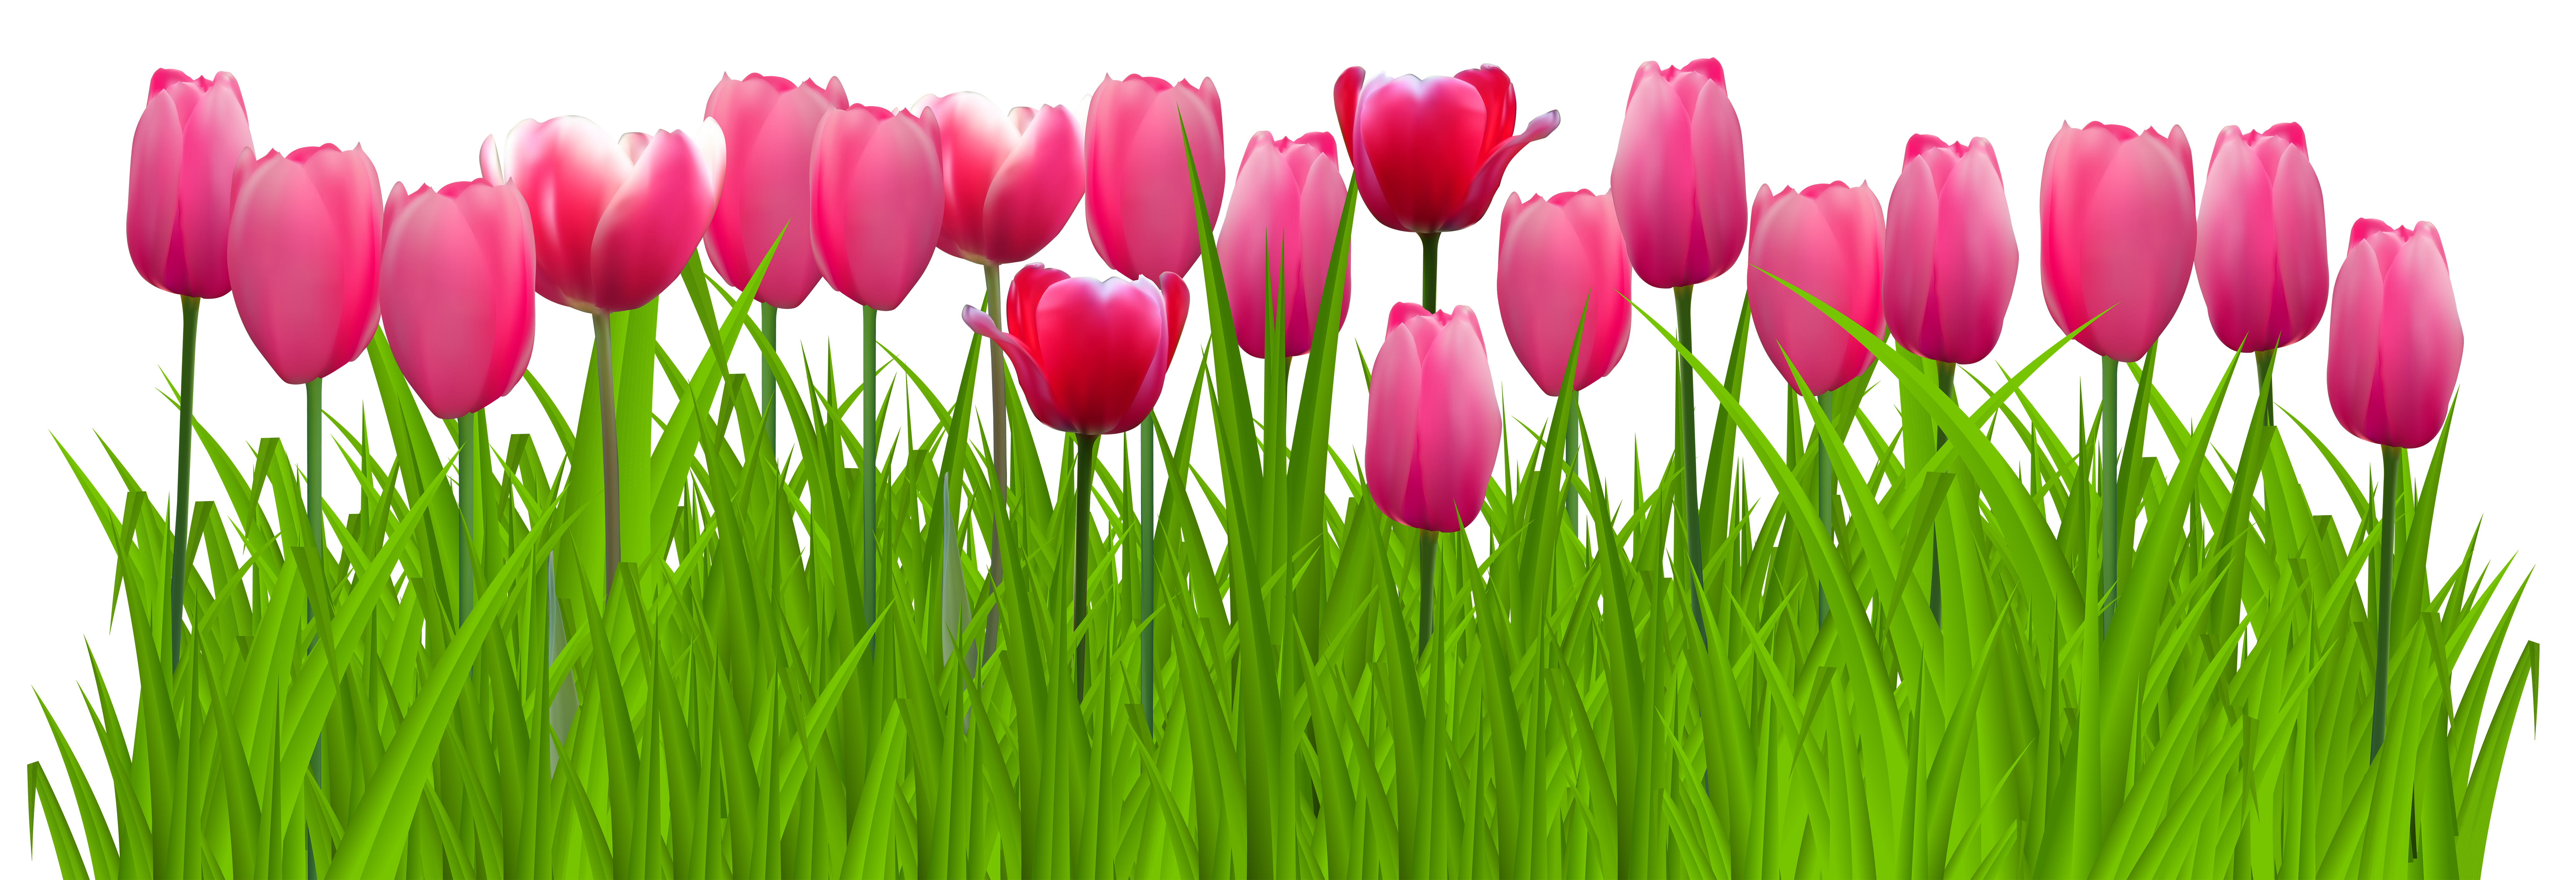 Grass with pink tulips. Ground clipart tulip